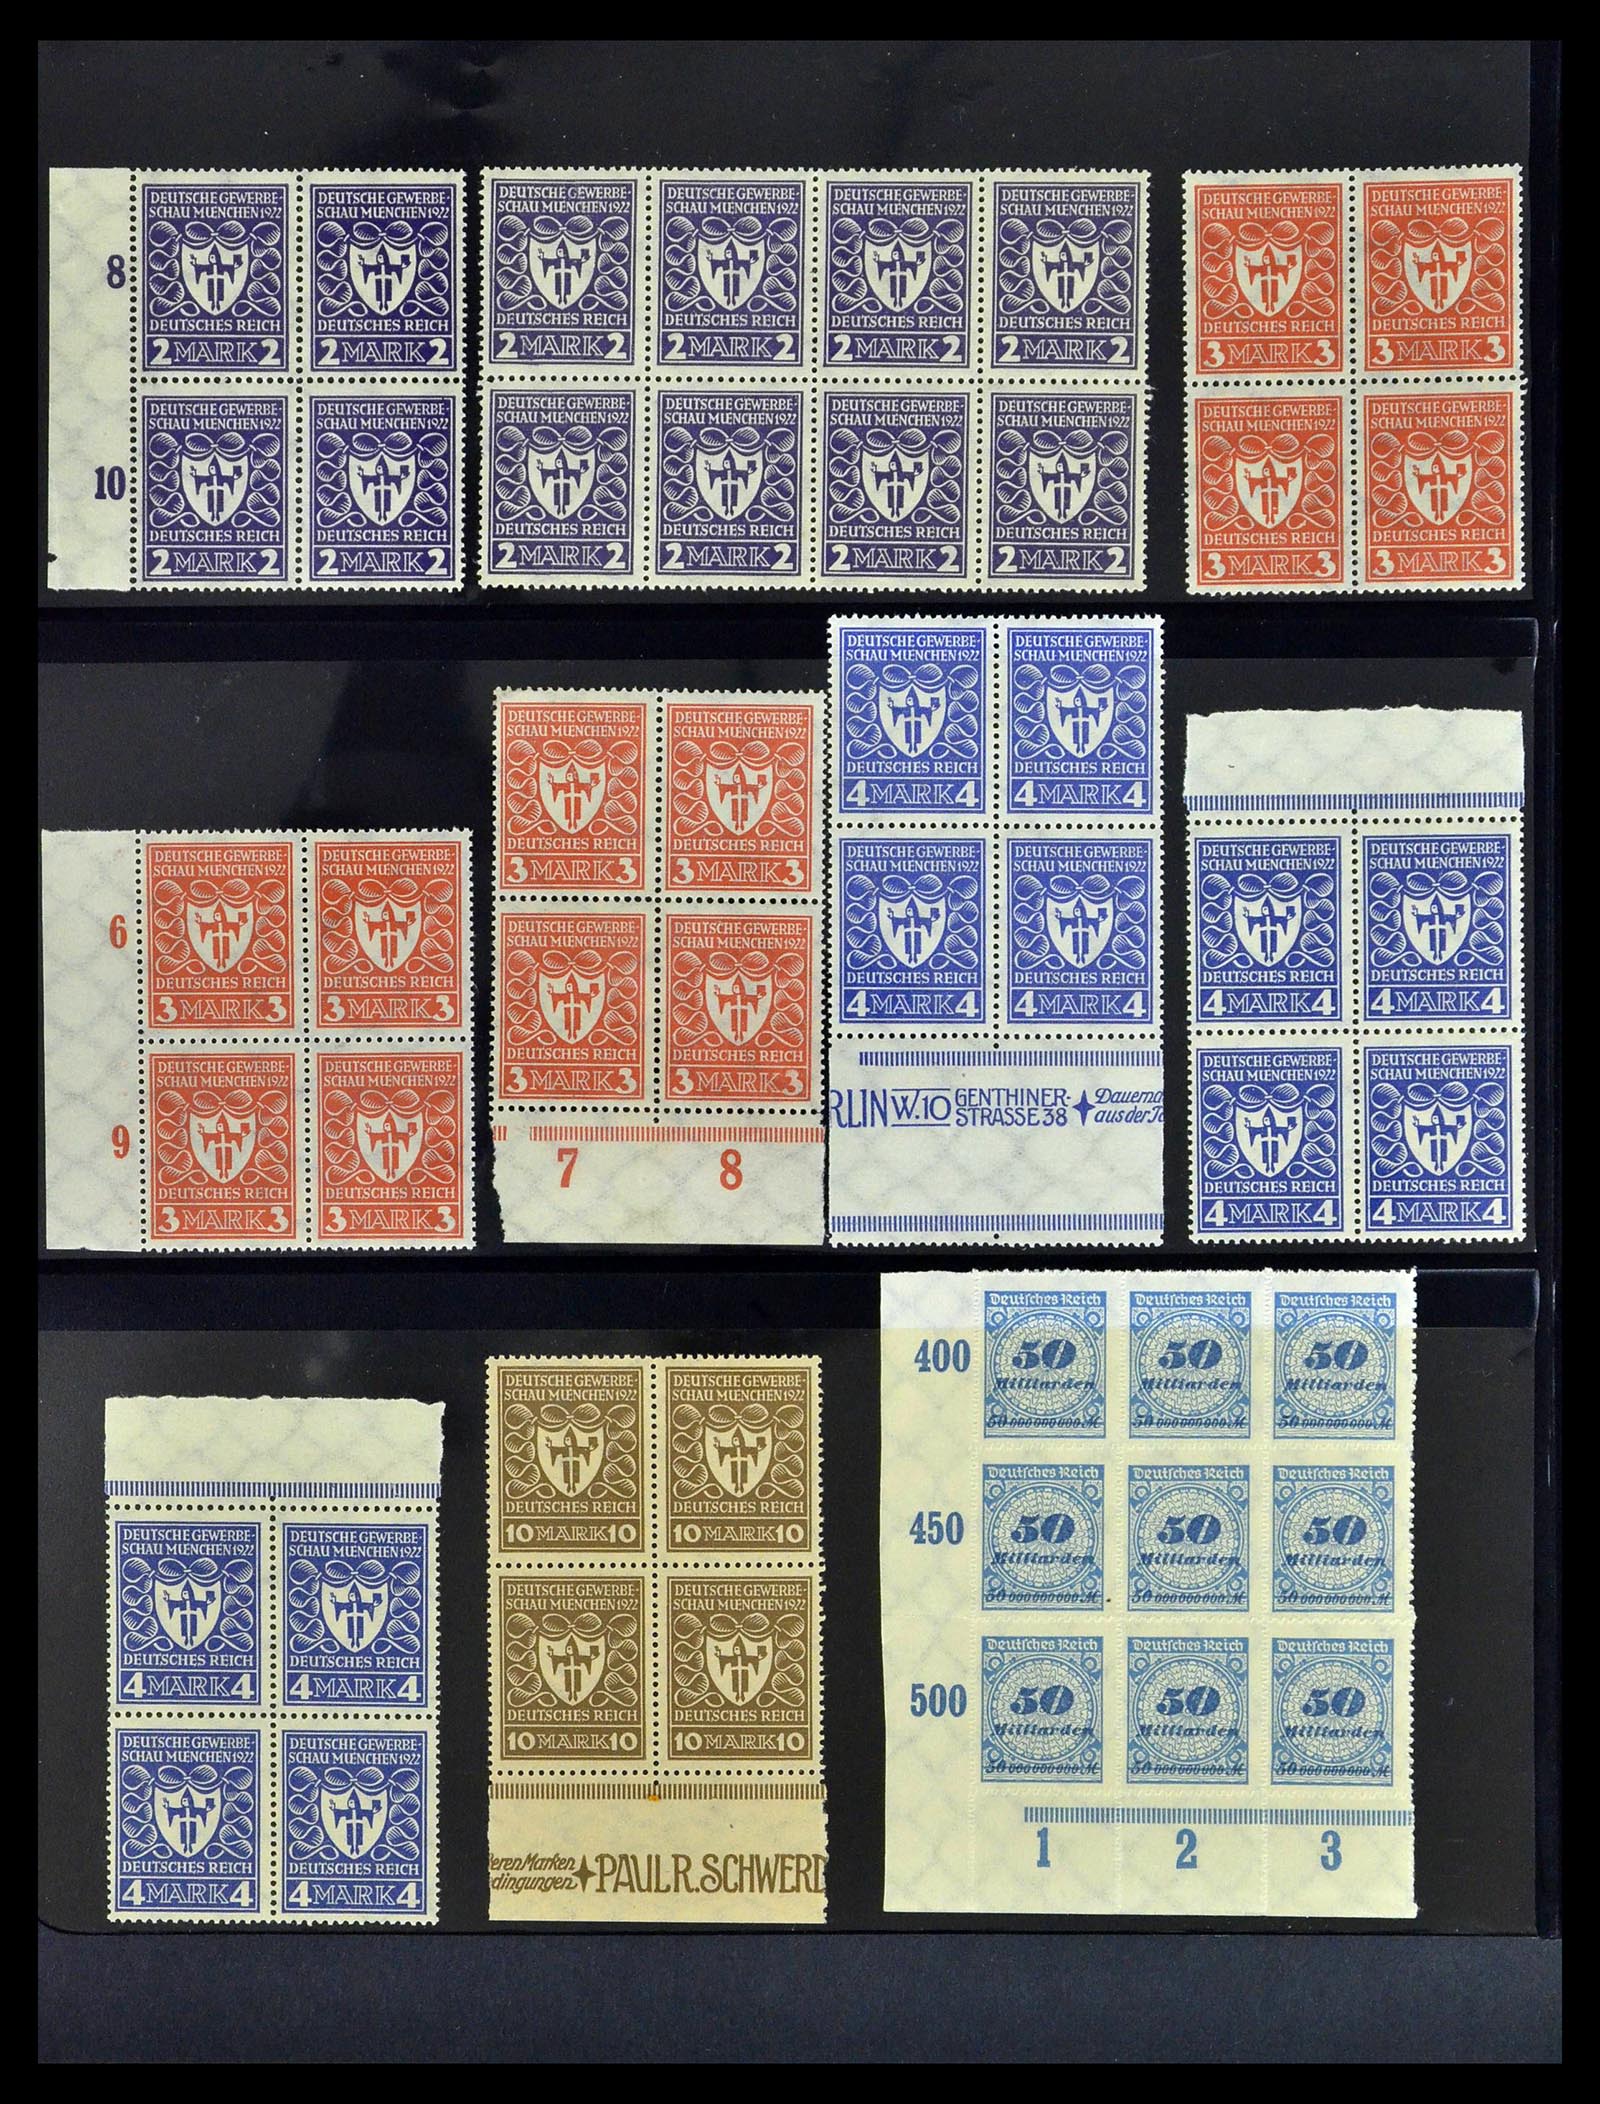 39255 0012 - Stamp collection 39255 German Reich MNH blocks of 4.